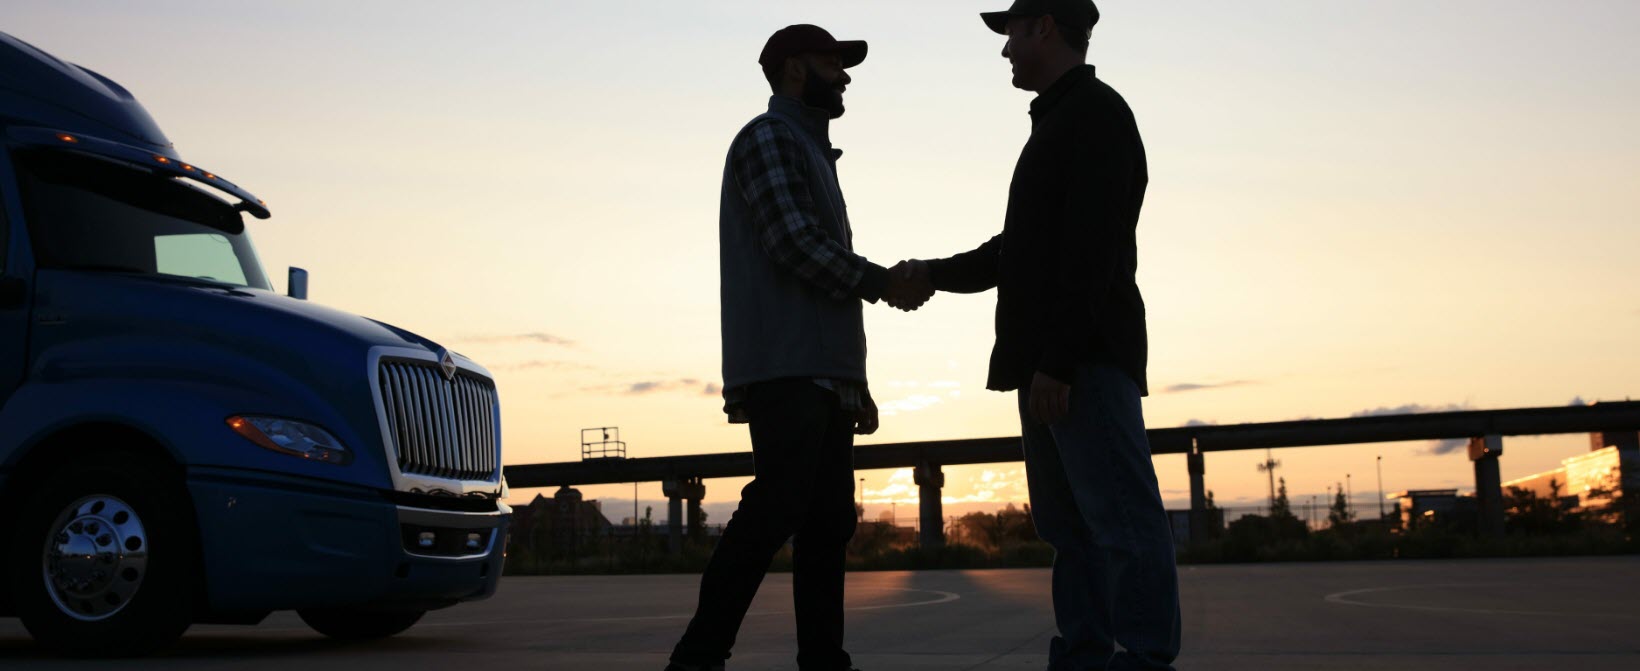 Two truck drivers shaking hands